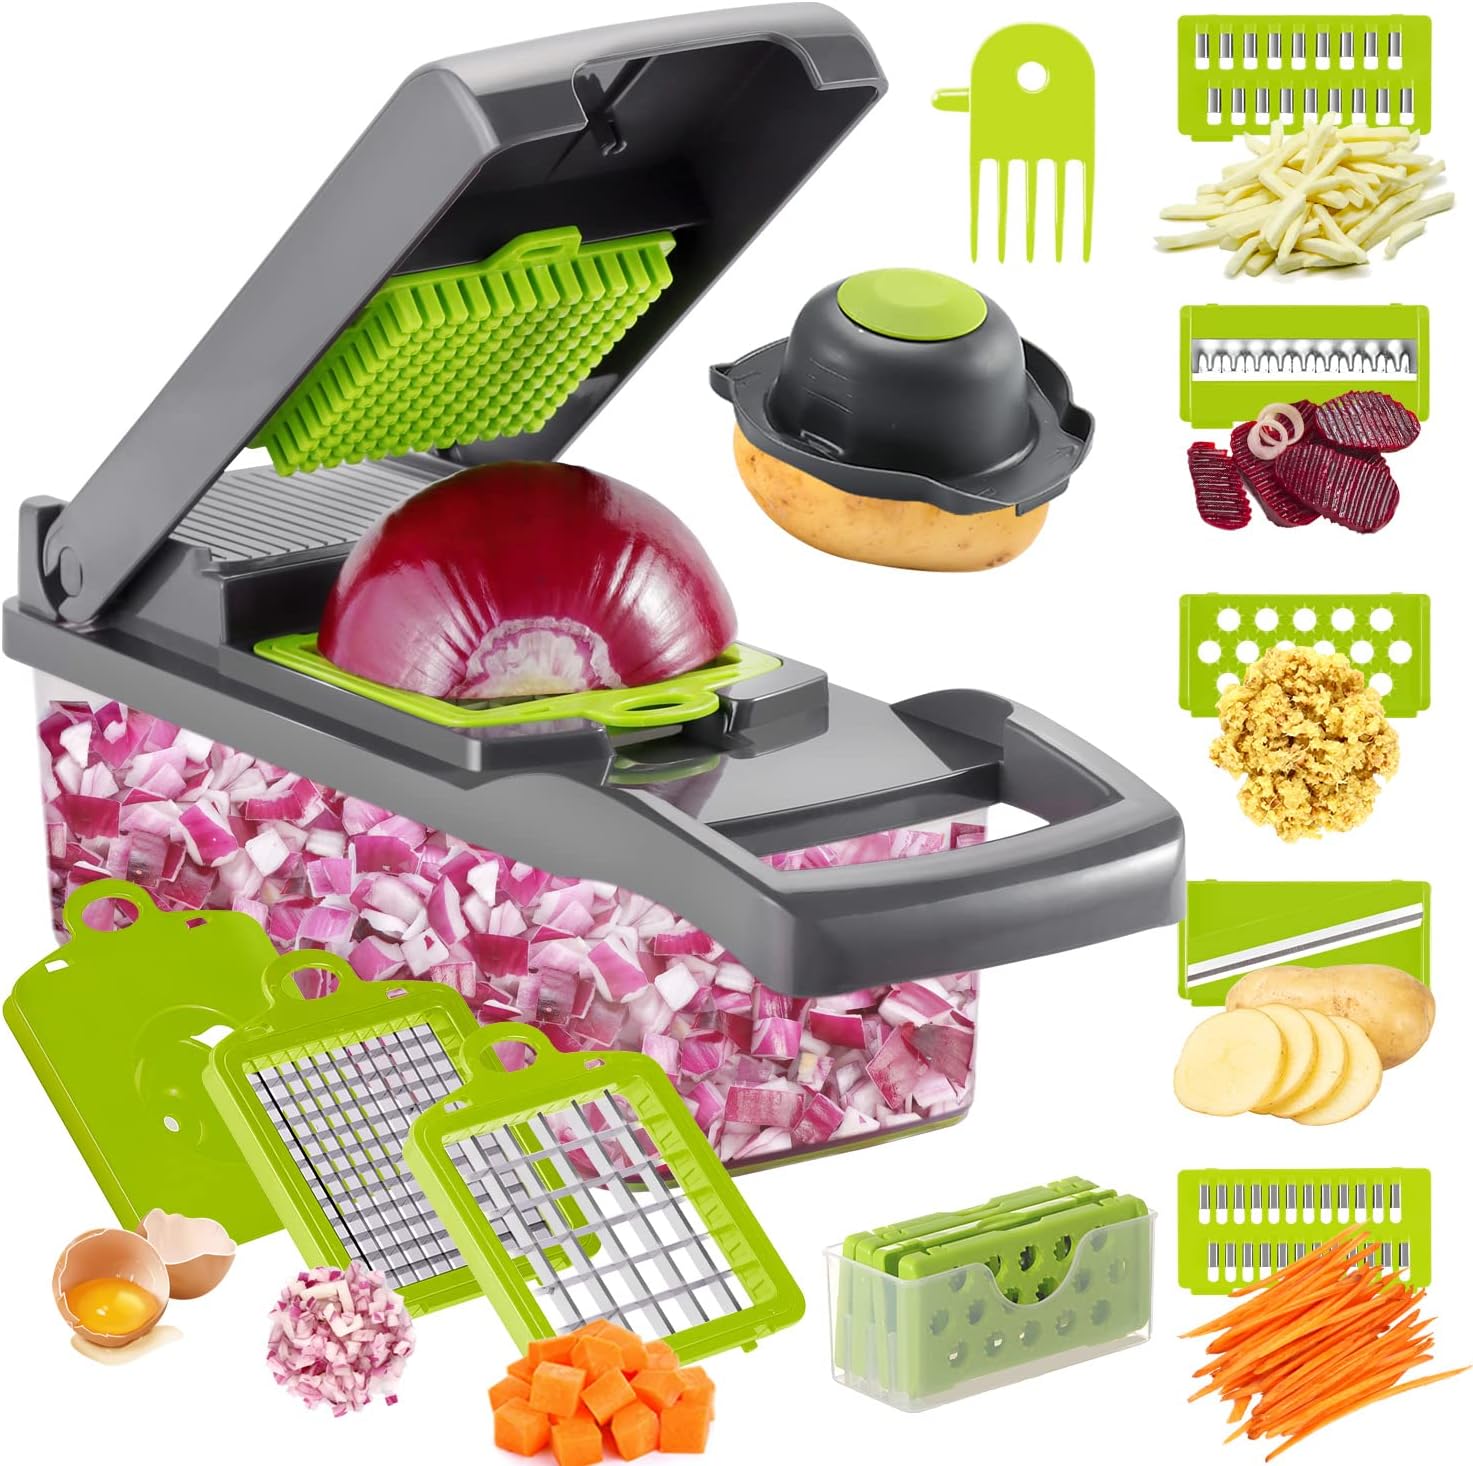 Vegetable Chopper, Kitexpert Onion Chopper Dicer Veggie Chopper with 8  Blades and Container with Lid, 13-in-1 Spiralizer Chopper Vegetable Cutter,  Kitchen Vegetable Slicer Dicer Cutter Food Chopper 